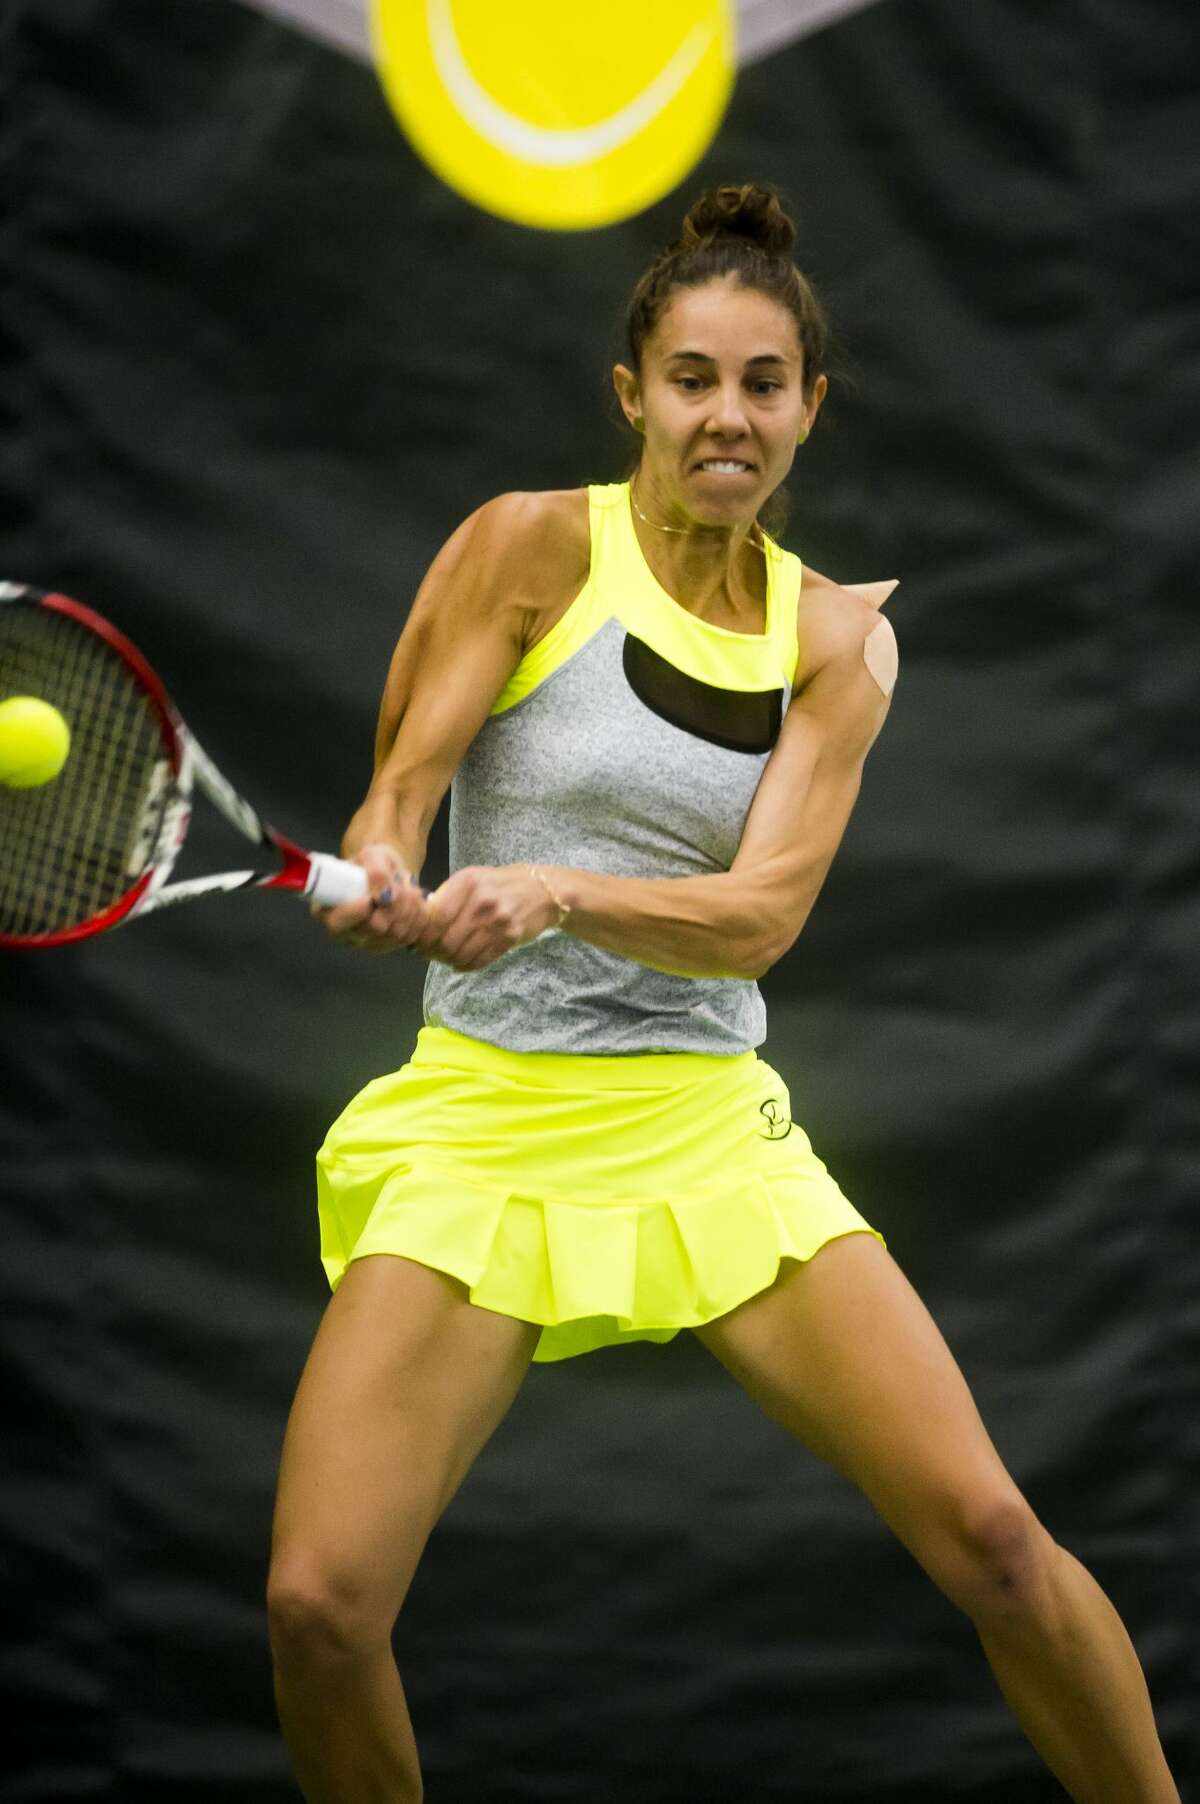 Mihaela Buzarnescu of Romania returns the ball in a match against Rebecca Peterson of Sweden during the Dow Tennis Classic on Friday, Feb. 2, 2018 at the Greater Midland Tennis Center. (Katy Kildee/kkildee@mdn.net)